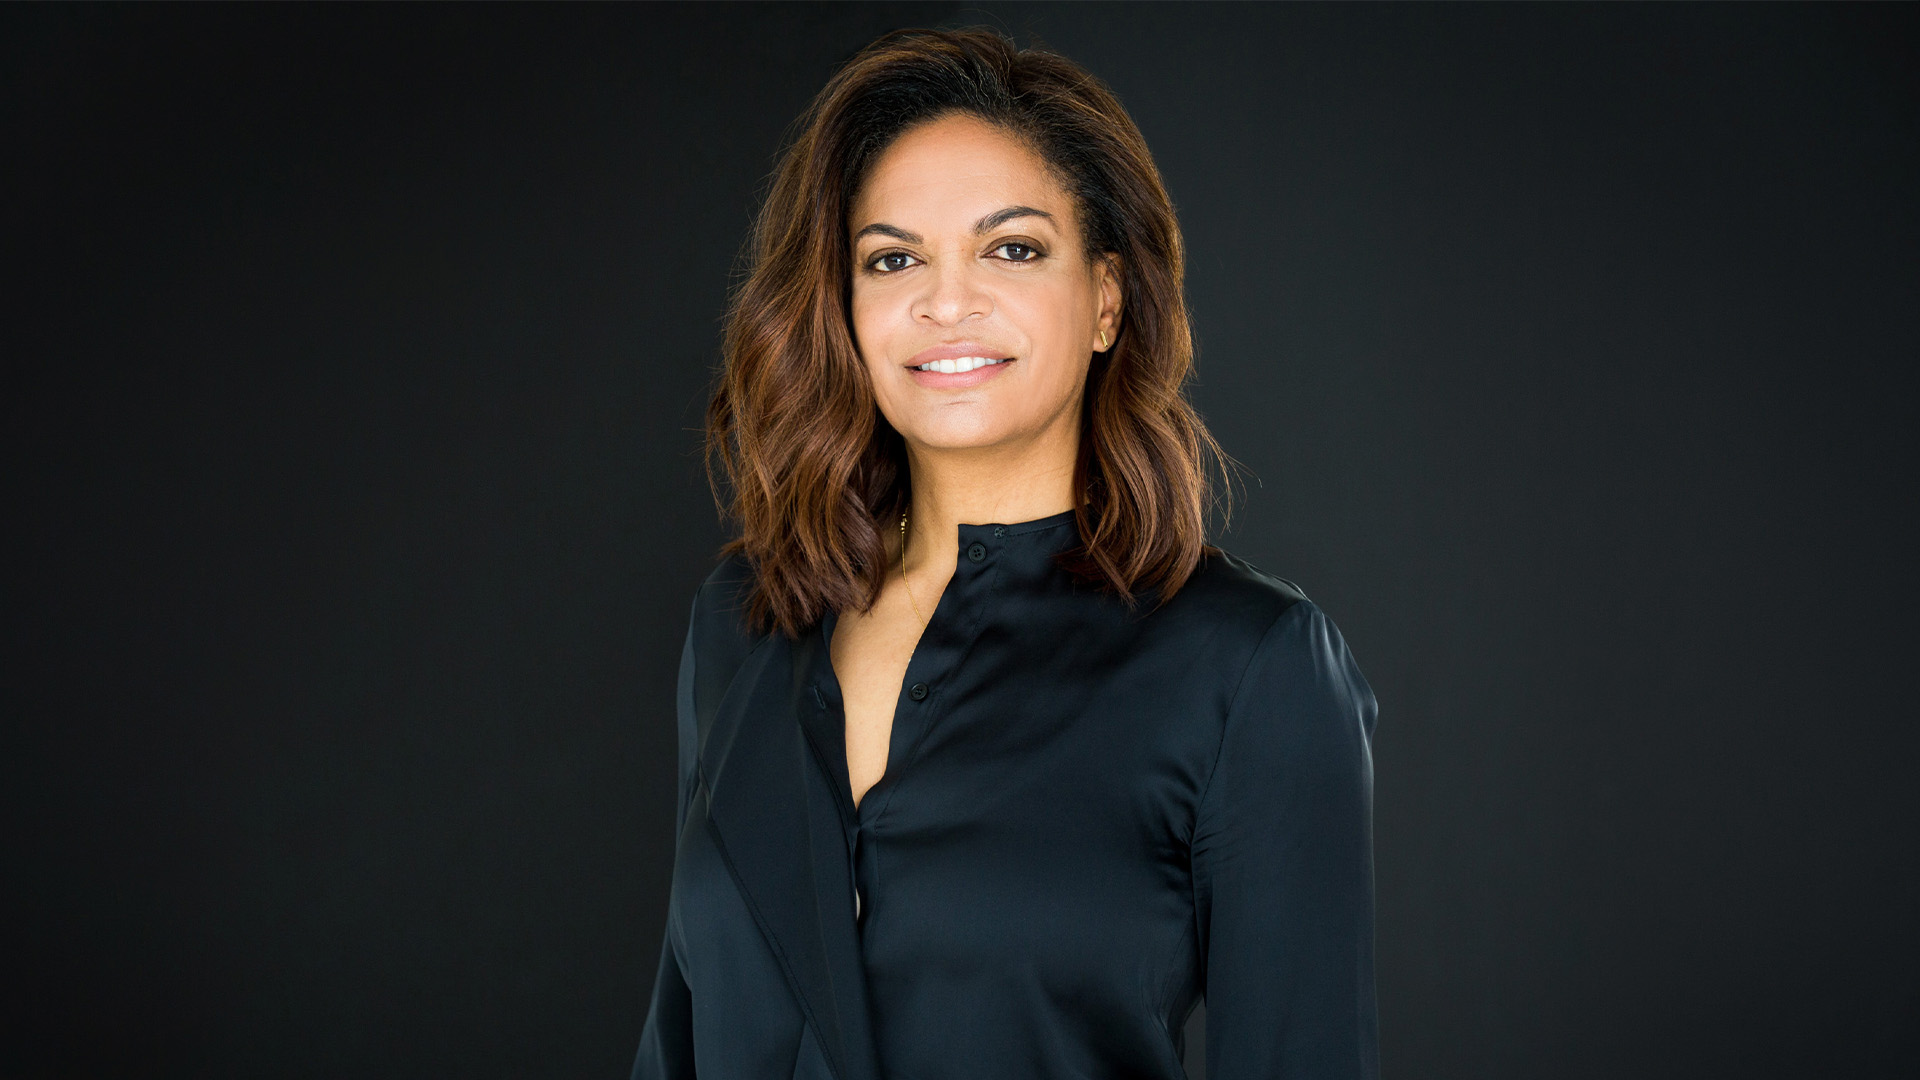 Ceci Kurzman, Investor, Board Member, And Former Music Executive, Launches Data-Tech Platform For Textured Hair Community